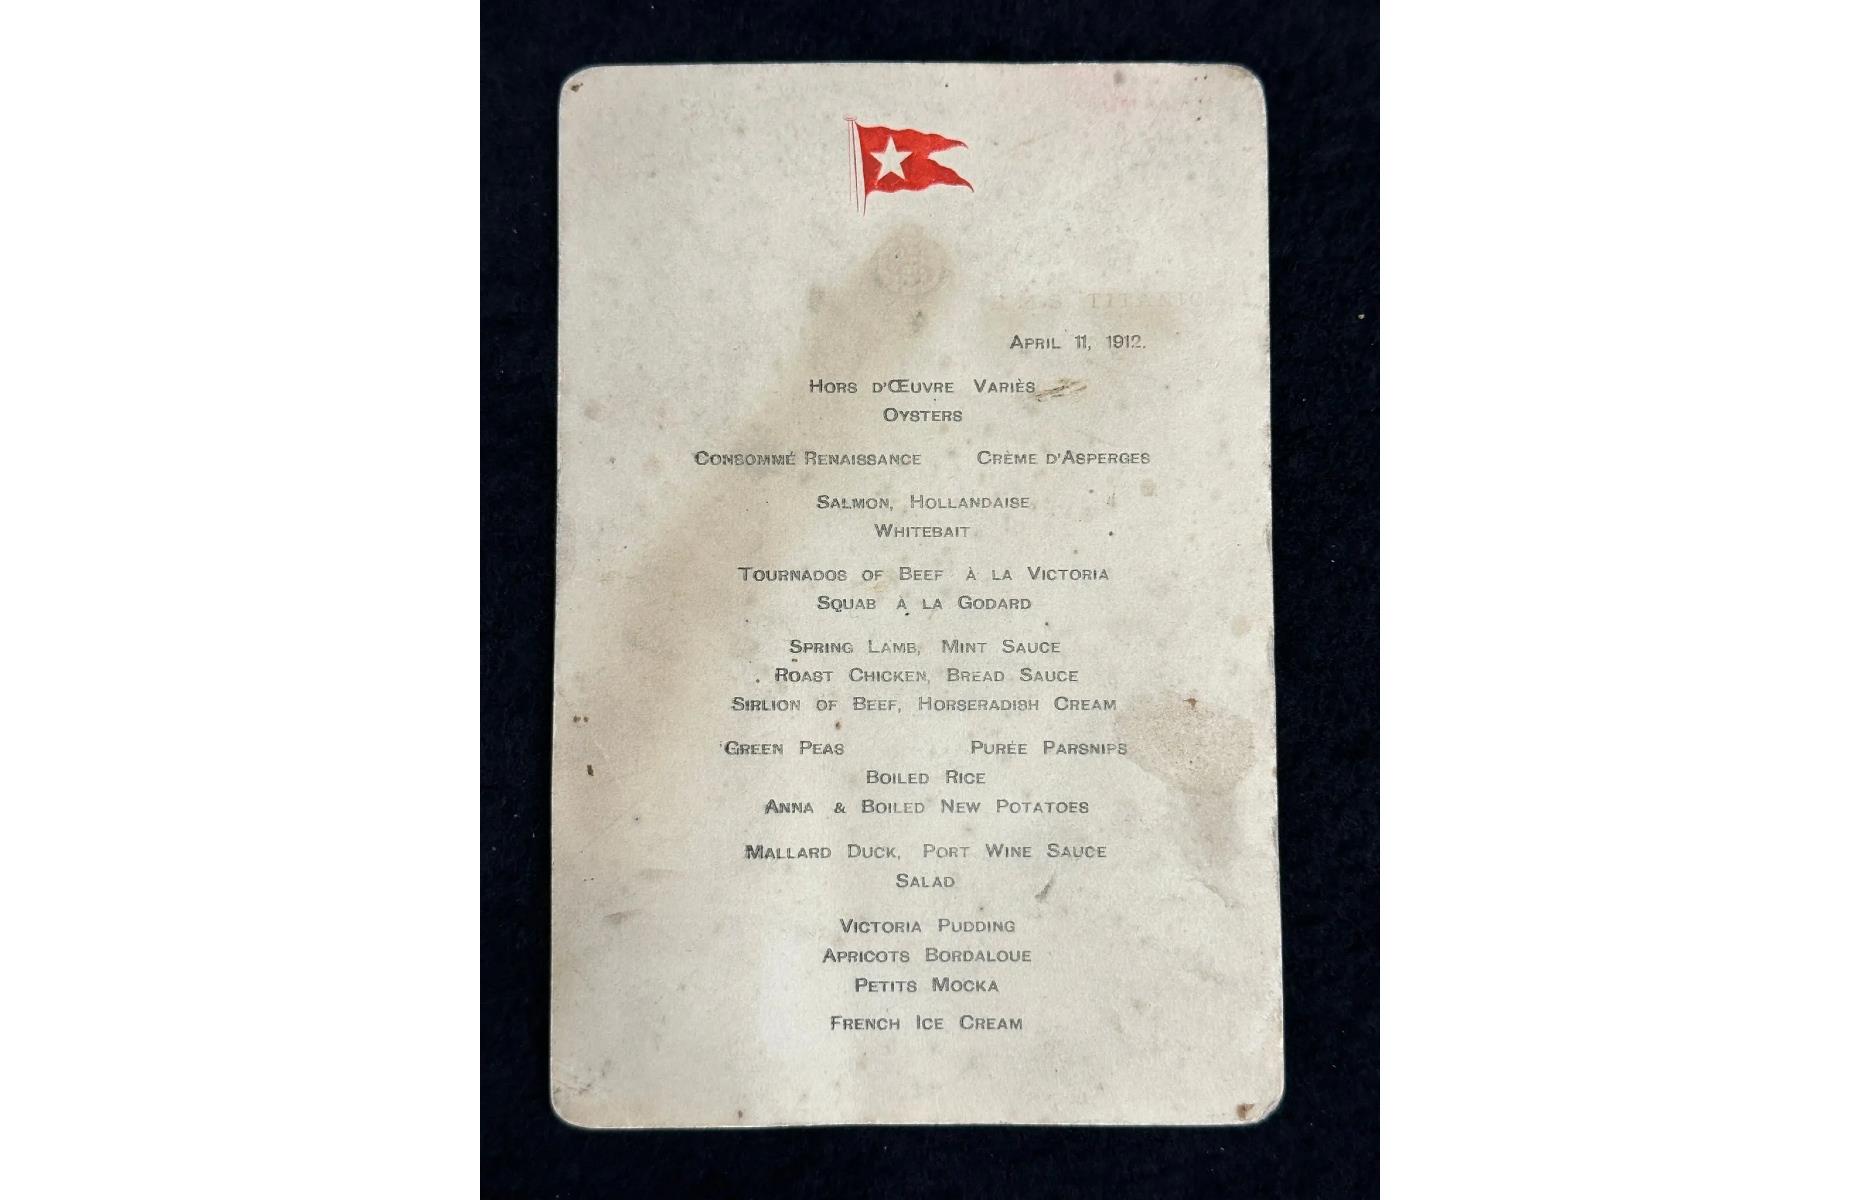 <p>Believed to be the only remaining first-class dinner menu from the night of 11 April, 1912 – three days before the tragedy, this piece went up for auction on 11 November, 2023 at Henry Aldridge & Son Ltd in Wiltshire, England, UK. With light water damage, it was described by the auction house as ‘a remarkable survivor from the most famous ocean liner of all time’. The lot, which was auctioned off alongside other Titanic memorabilia, including a first-class tartan-patterned deck blanket, far surpassed its estimate of £70,000 (around $85,000).</p>